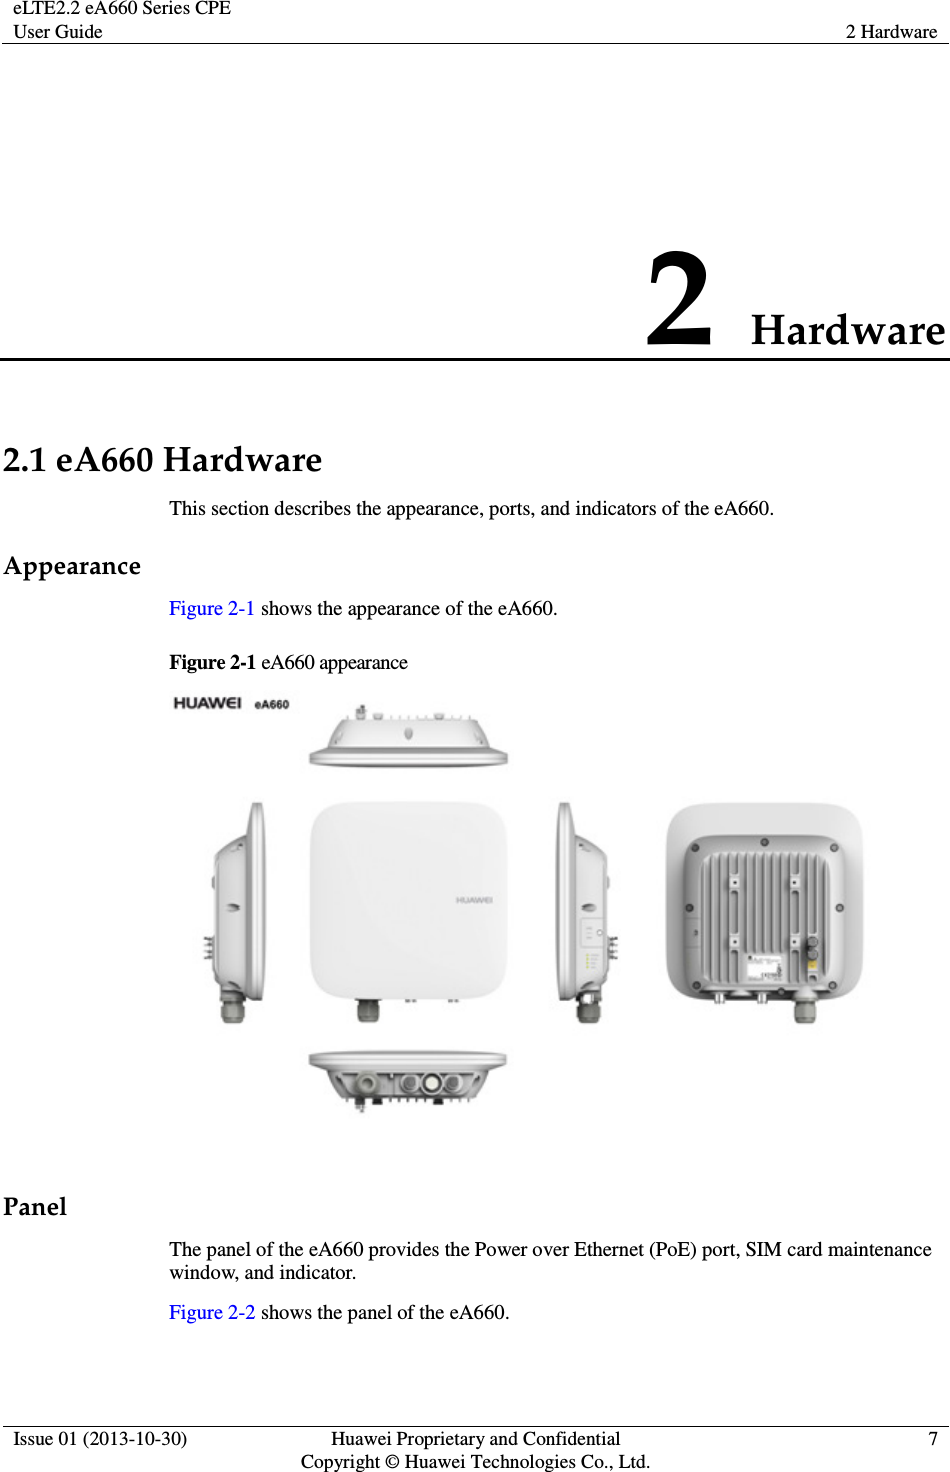 eLTE2.2 eA660 Series CPE User Guide  2 Hardware  Issue 01 (2013-10-30)  Huawei Proprietary and Confidential                                     Copyright © Huawei Technologies Co., Ltd. 7  2 Hardware 2.1 eA660 Hardware This section describes the appearance, ports, and indicators of the eA660. Appearance Figure 2-1 shows the appearance of the eA660. Figure 2-1 eA660 appearance   Panel The panel of the eA660 provides the Power over Ethernet (PoE) port, SIM card maintenance window, and indicator. Figure 2-2 shows the panel of the eA660. 